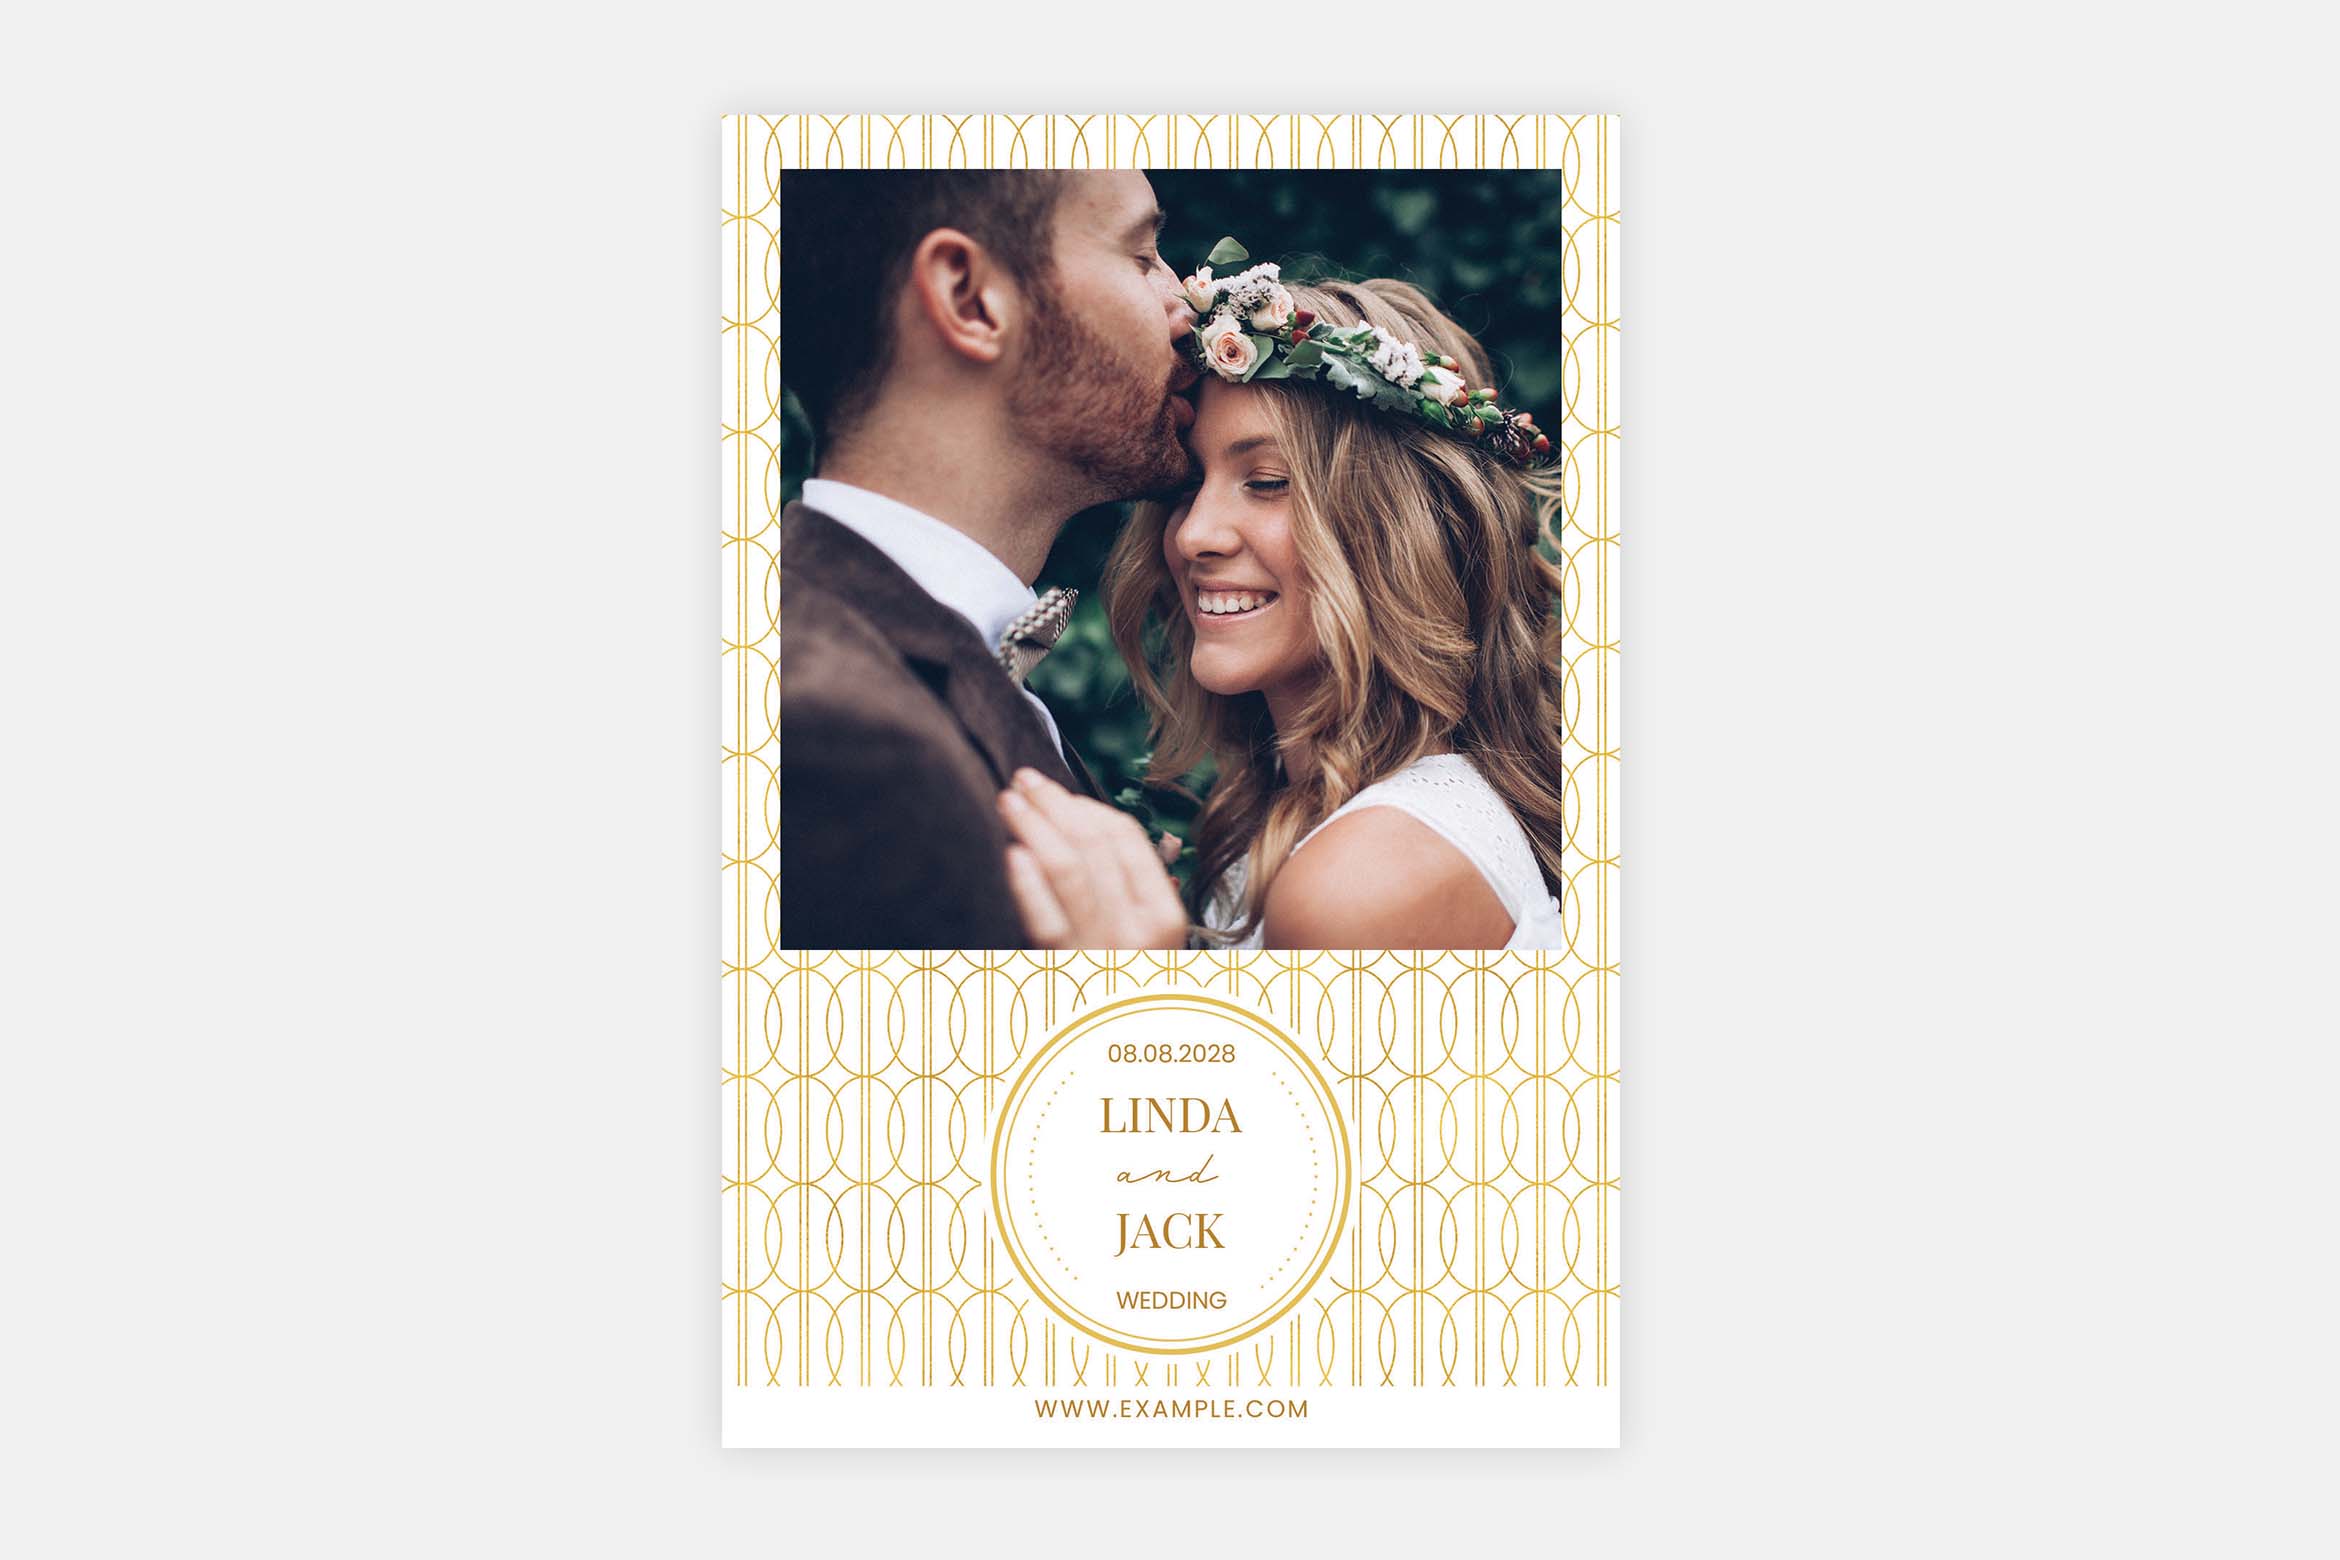 Wedding Photo Booth Template (PSD, PNG, DSLR Booth)